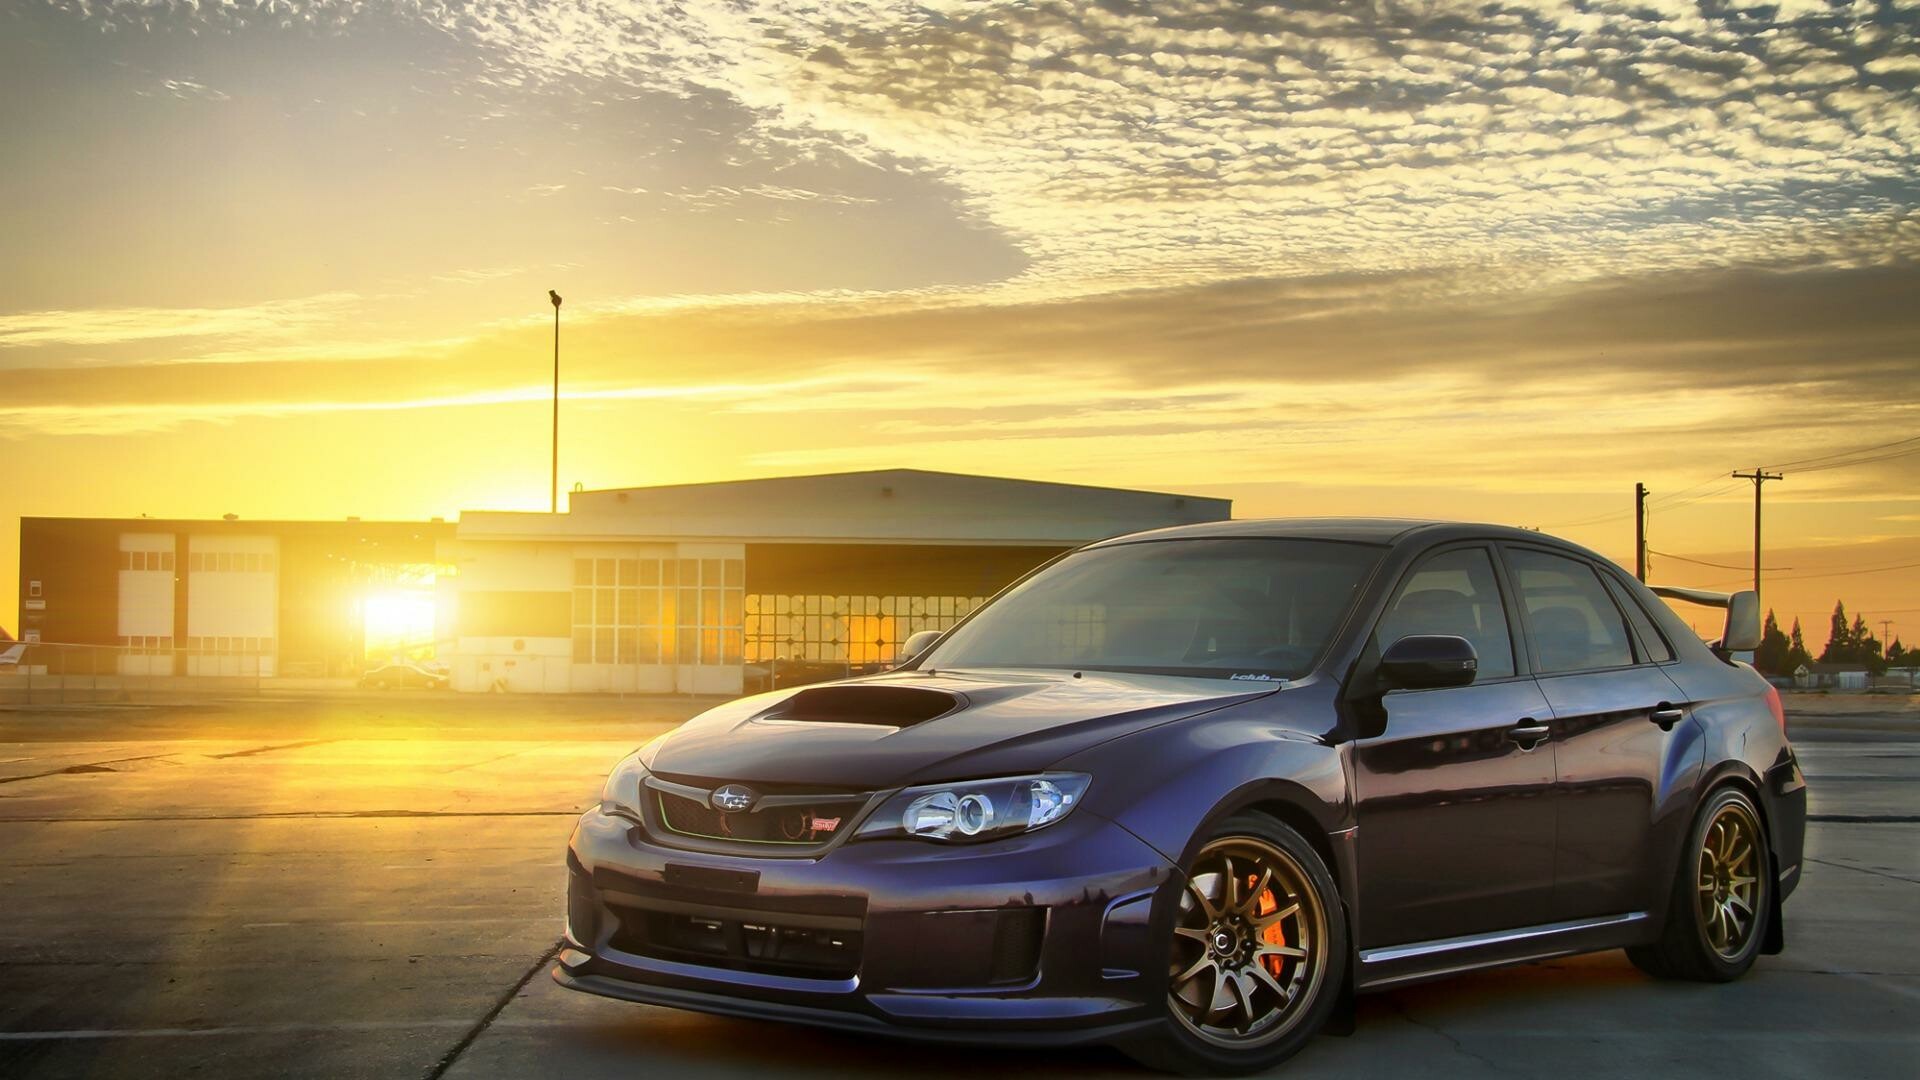 Subaru: The company is renowned for using high-torque boxer engines in their vehicle line. 1920x1080 Full HD Background.